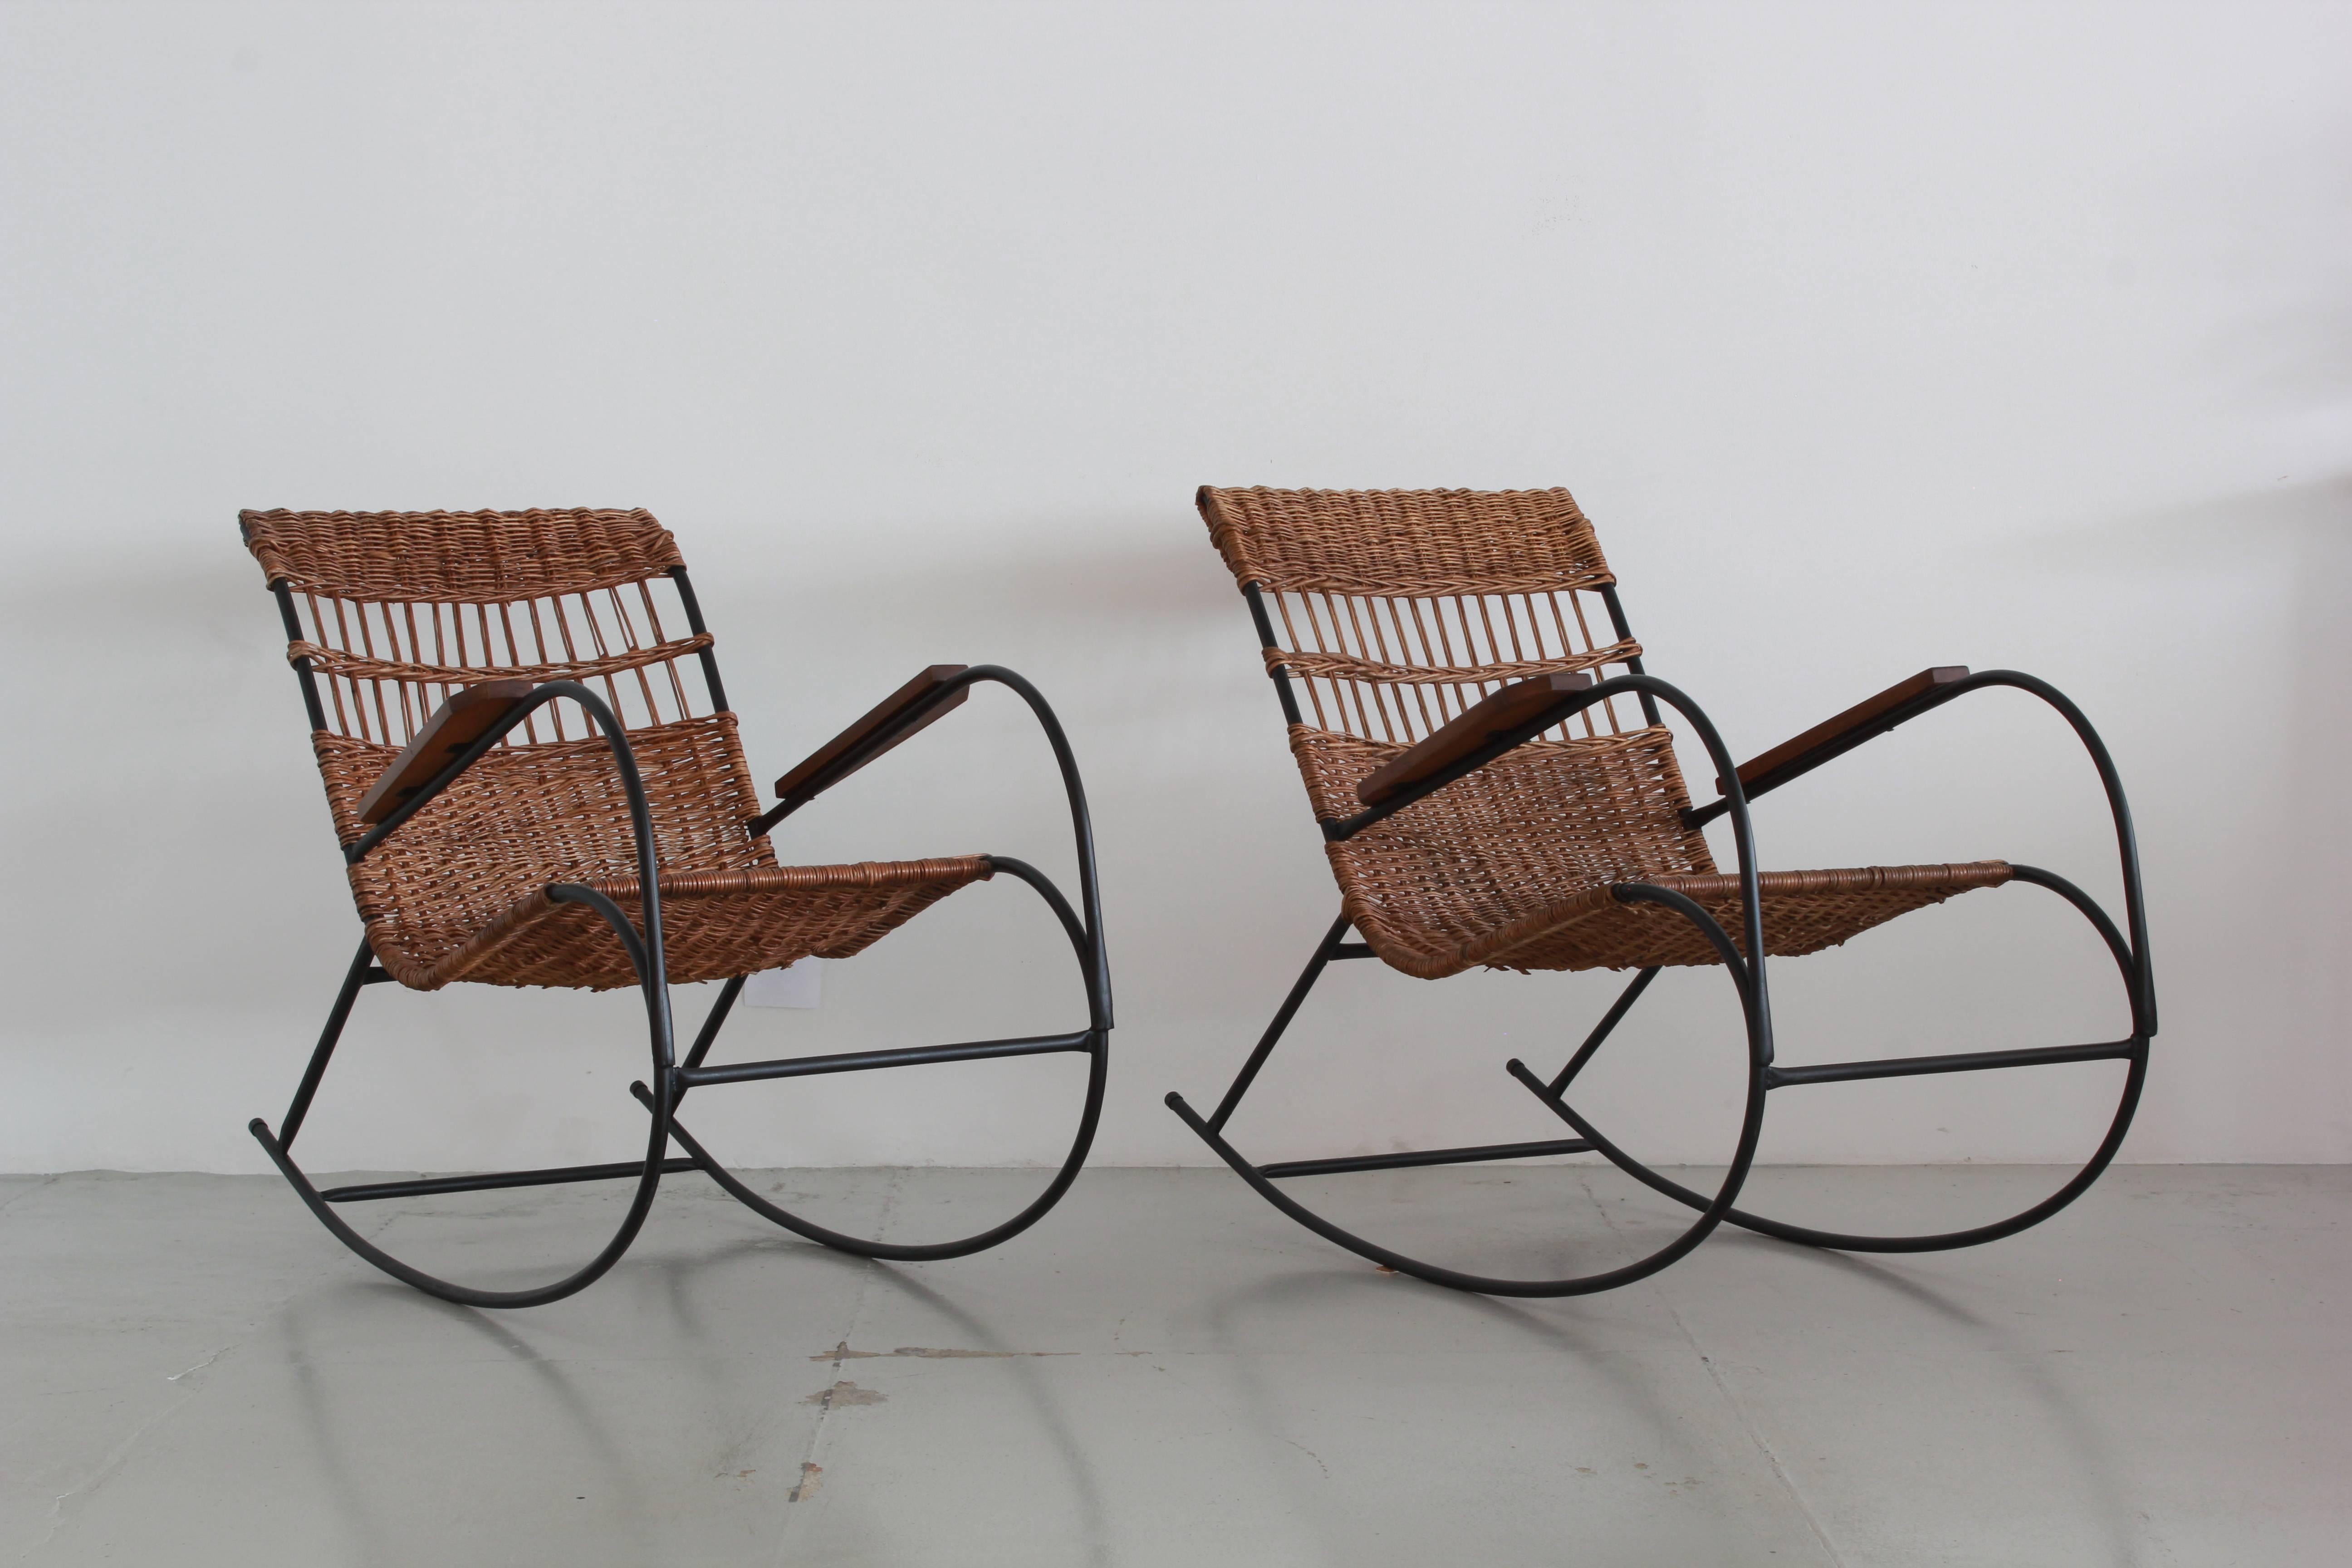 Fantastic pair of wicker rocking chairs with iron curved legs, wood arms and woven wicker seats.
Perfect for a front porch!